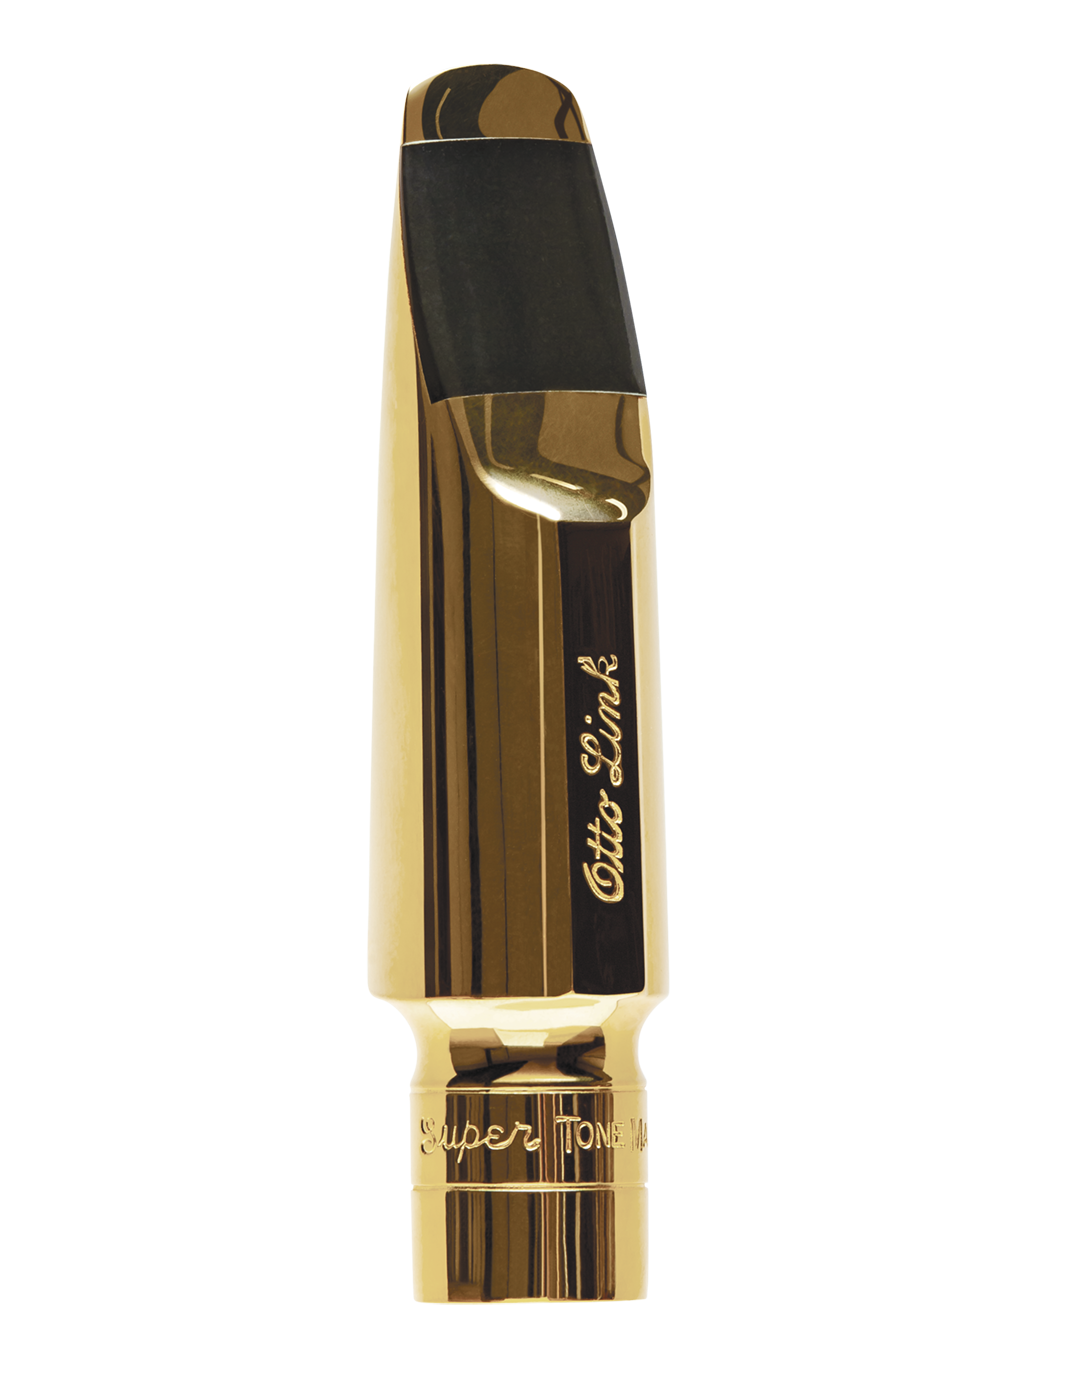 Otto Link Super Tone Master - JJ Babbitt | Mouthpieces Created for 